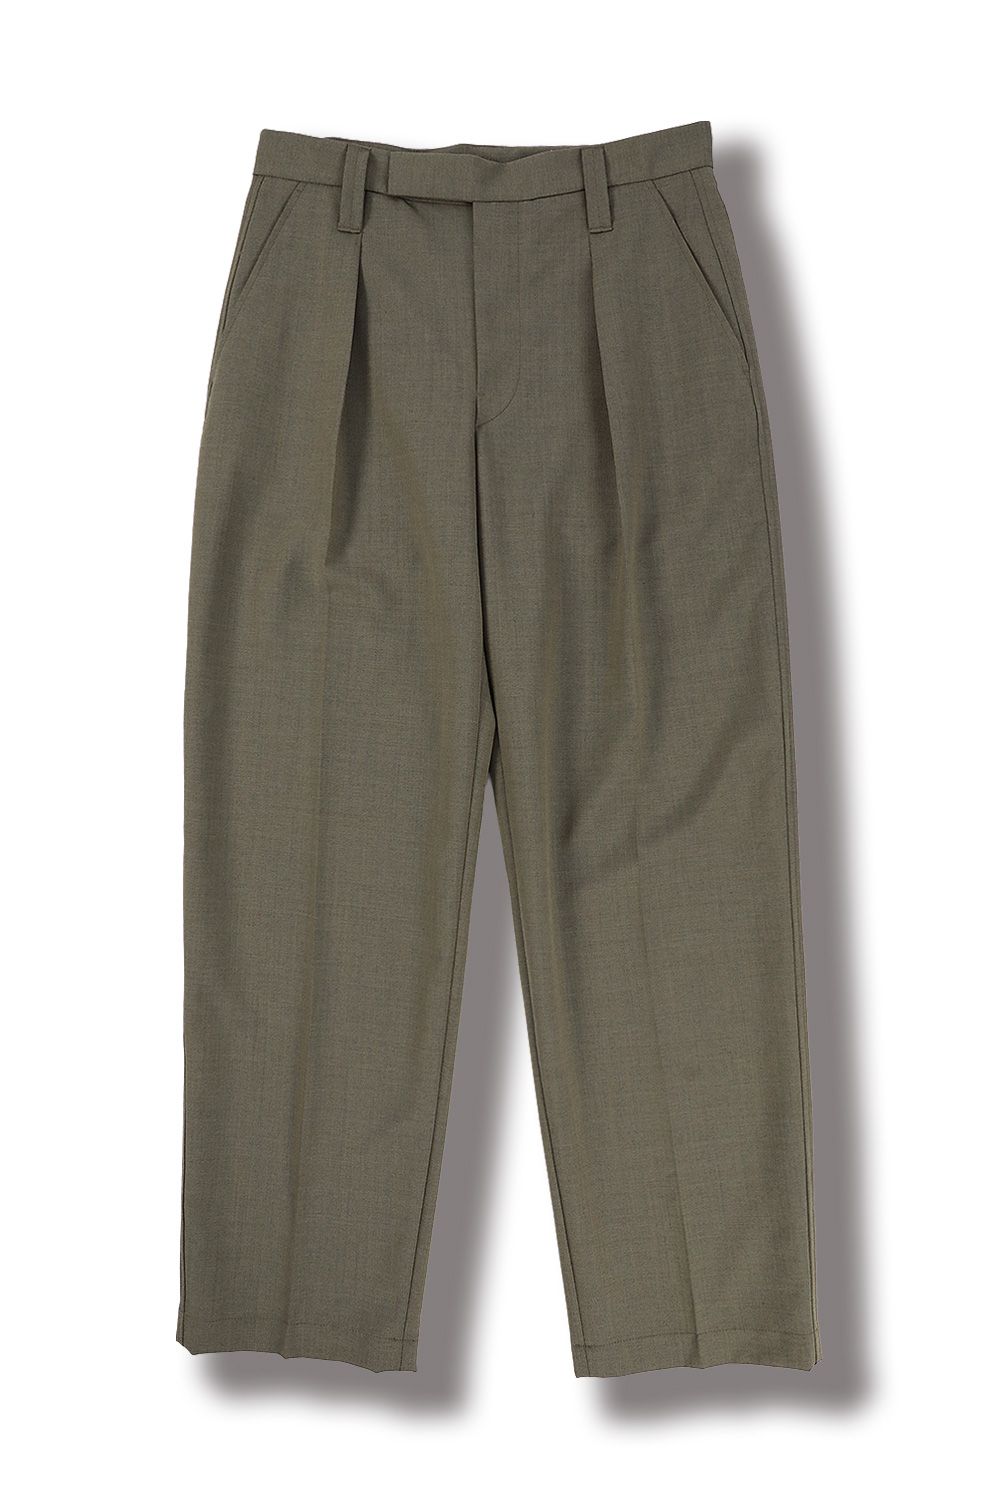 LEMAIRE - ONE PLEAT PANTS(BEIGE GREY) | Acacia ONLINESTORE